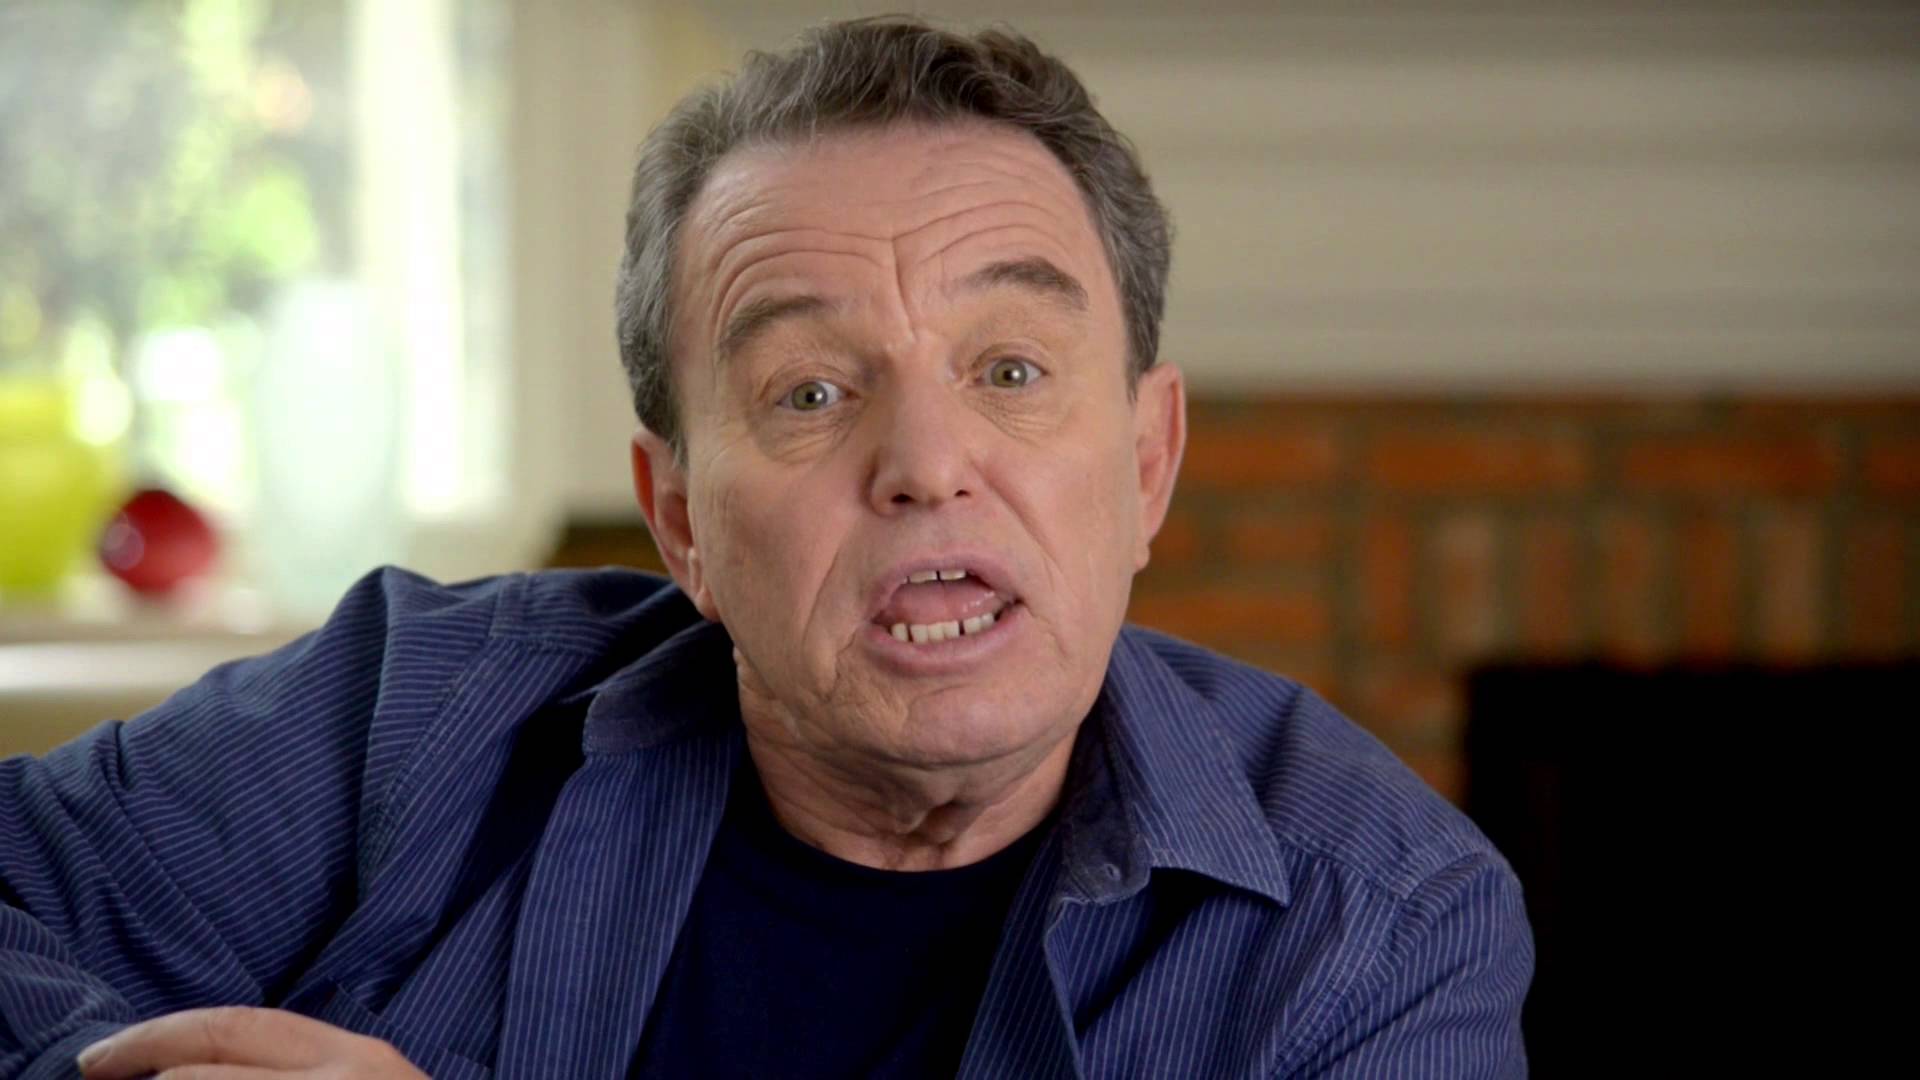 More Pictures Of Jerry Mathers. 